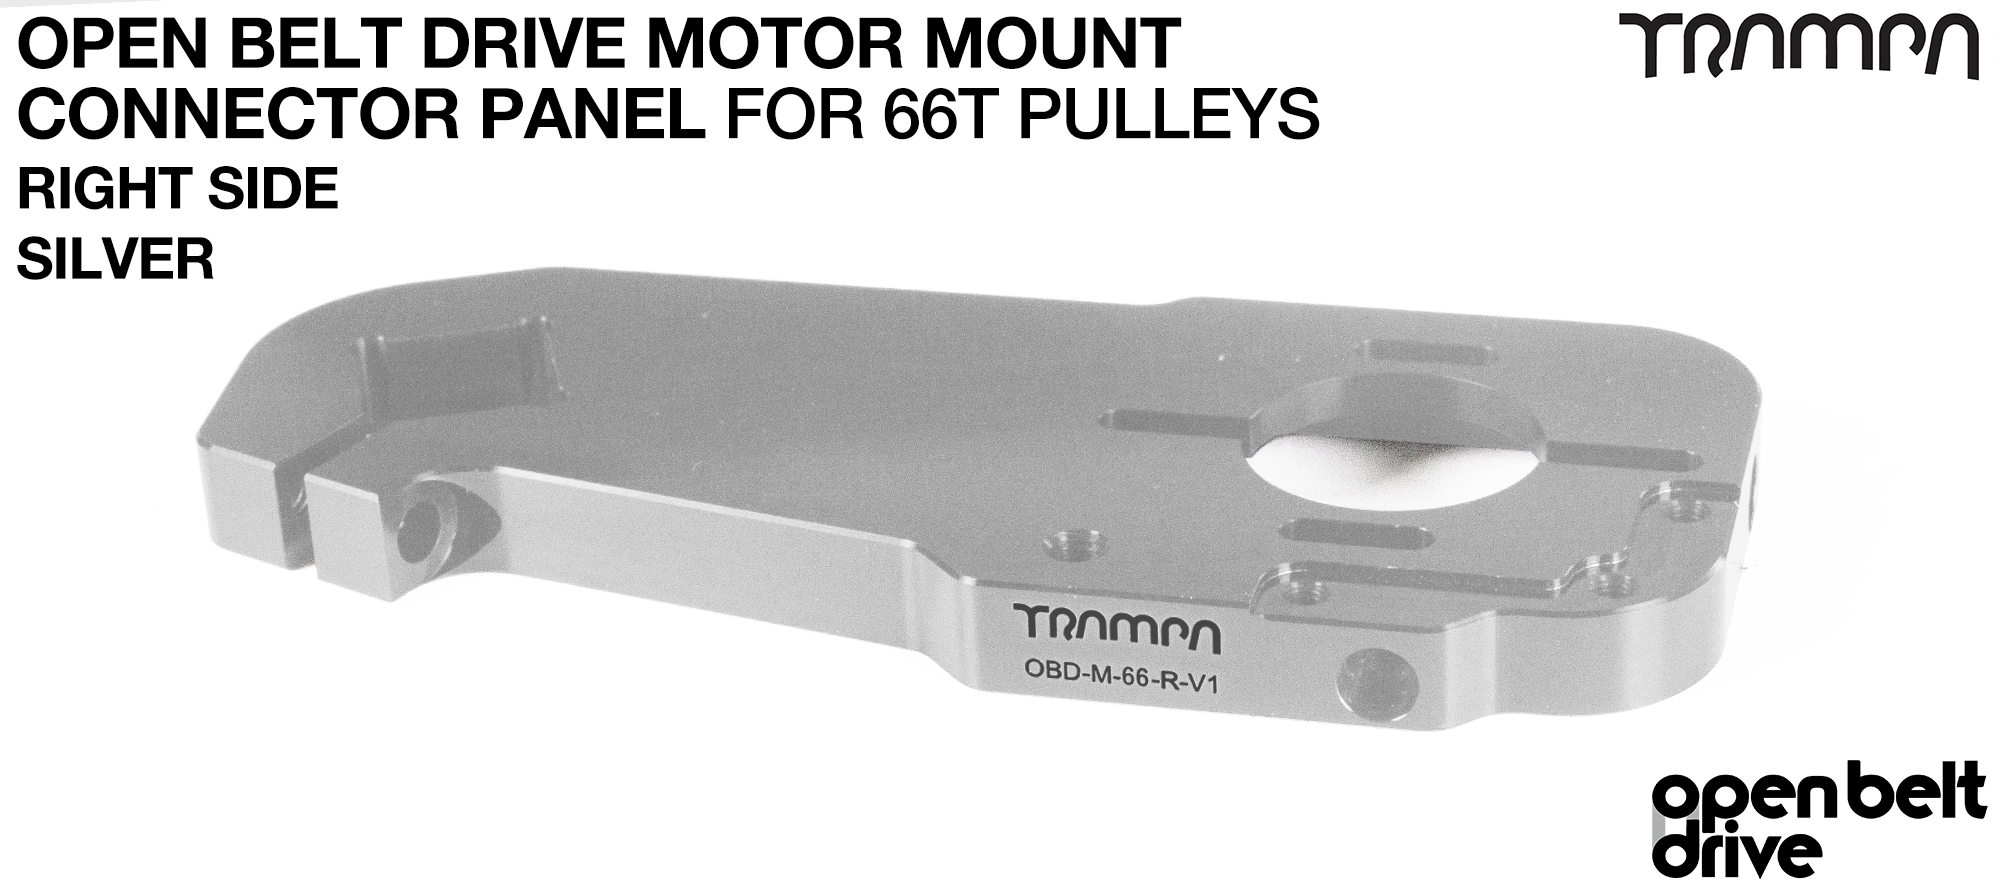 OBD Open Belt Drive Motor Mount Connector Panel for 66 tooth Pulleys - GOOFY - SILVER